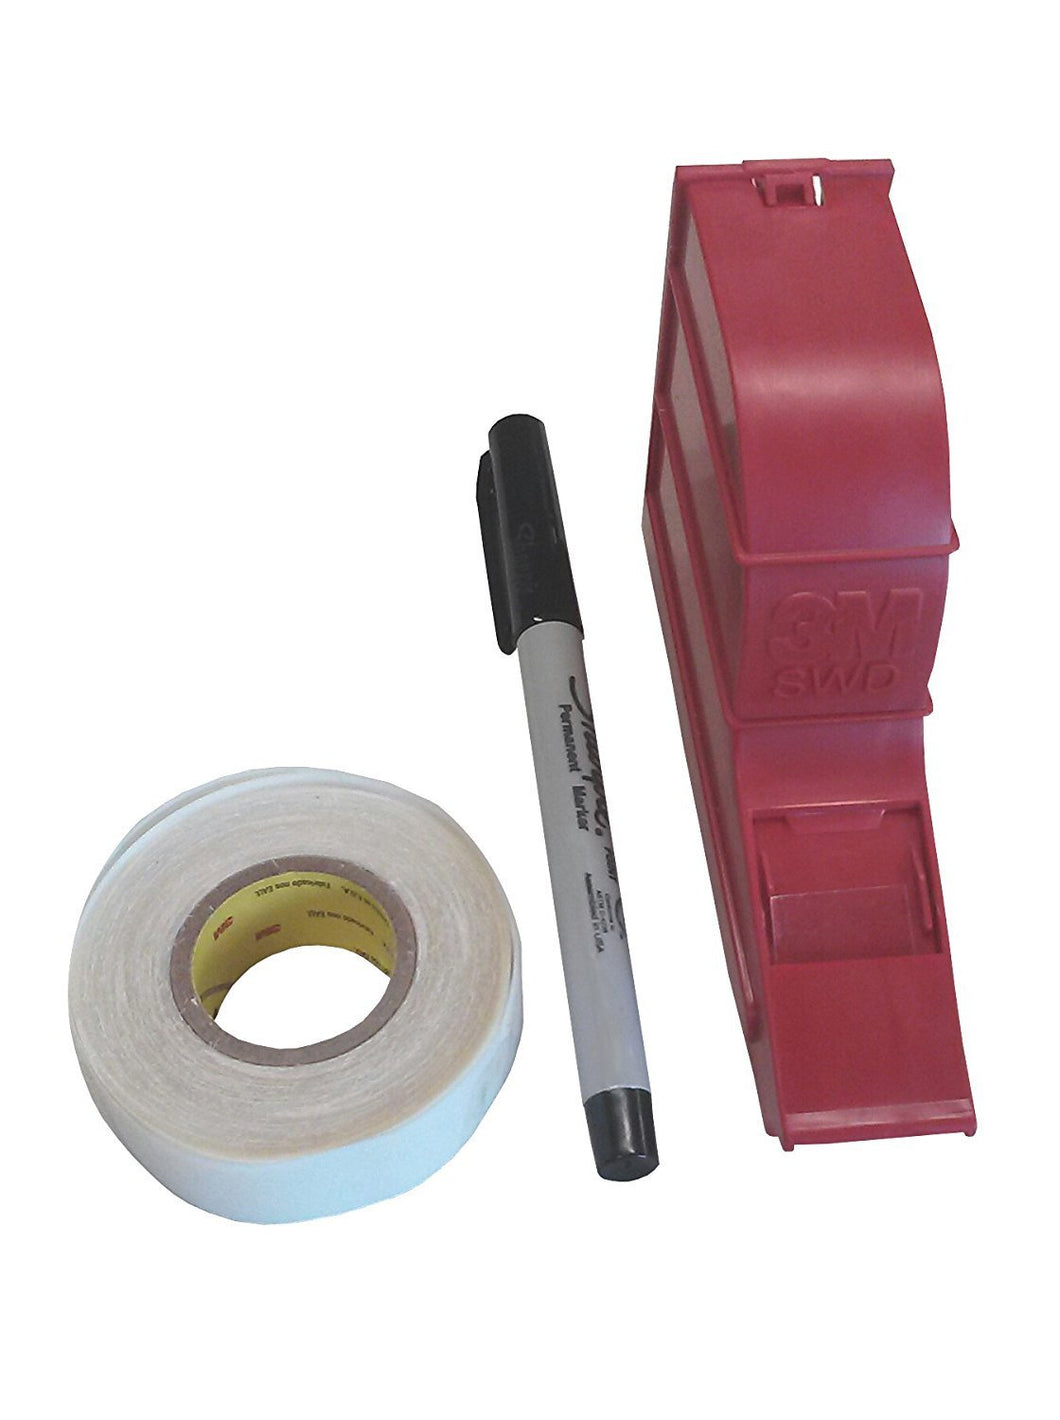 Mark everything clearly - from wires and cables to household items and sporting equipment | The reusable dispenser can be easily refilled with tape | Dispenser comes with SWD tape and an SMP pen | Dispenser is made of strong plastic that's made to last | Has a marking area of 0.75 in x 1.375 in